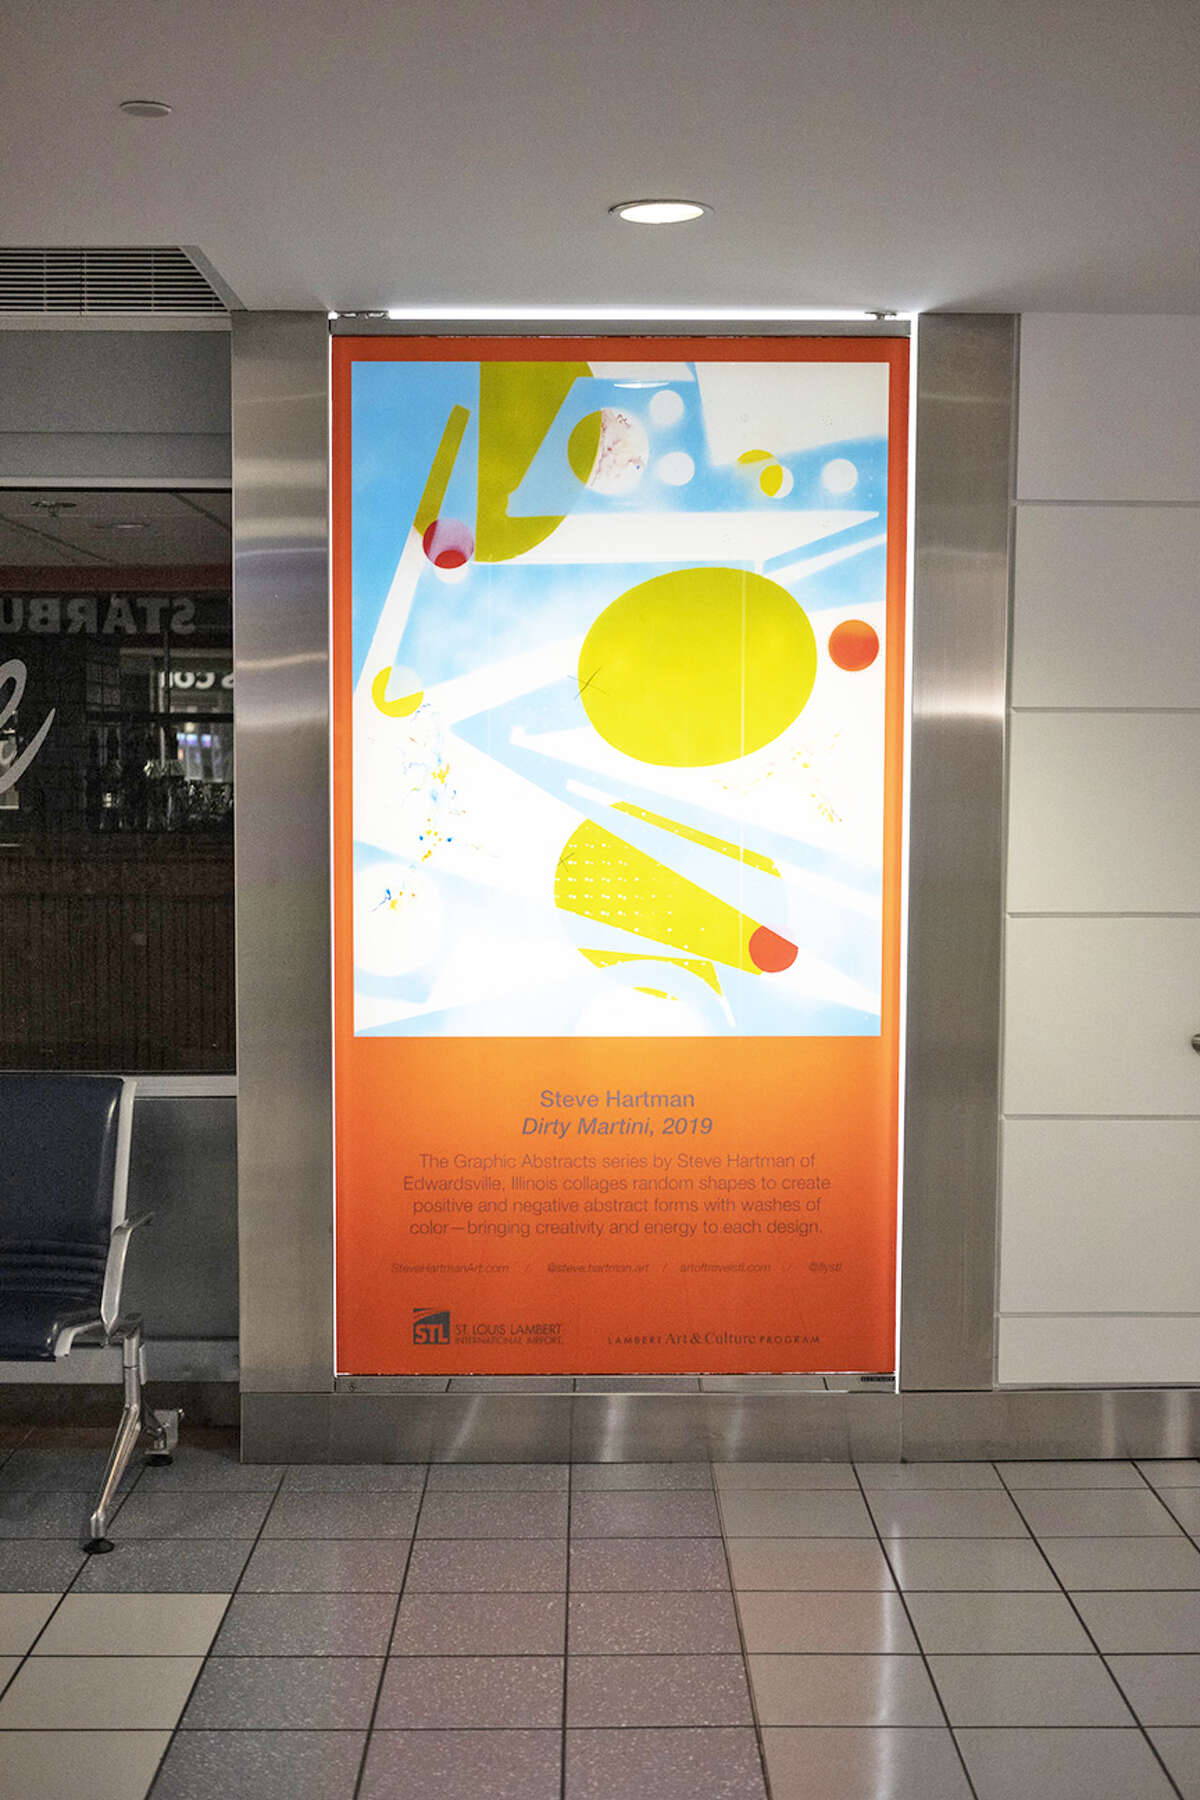 “Dirty Martini” is among the works of art by Edwardsville artist Steve Hartman now on display in Terminal 1 at St. Louis International Airport.